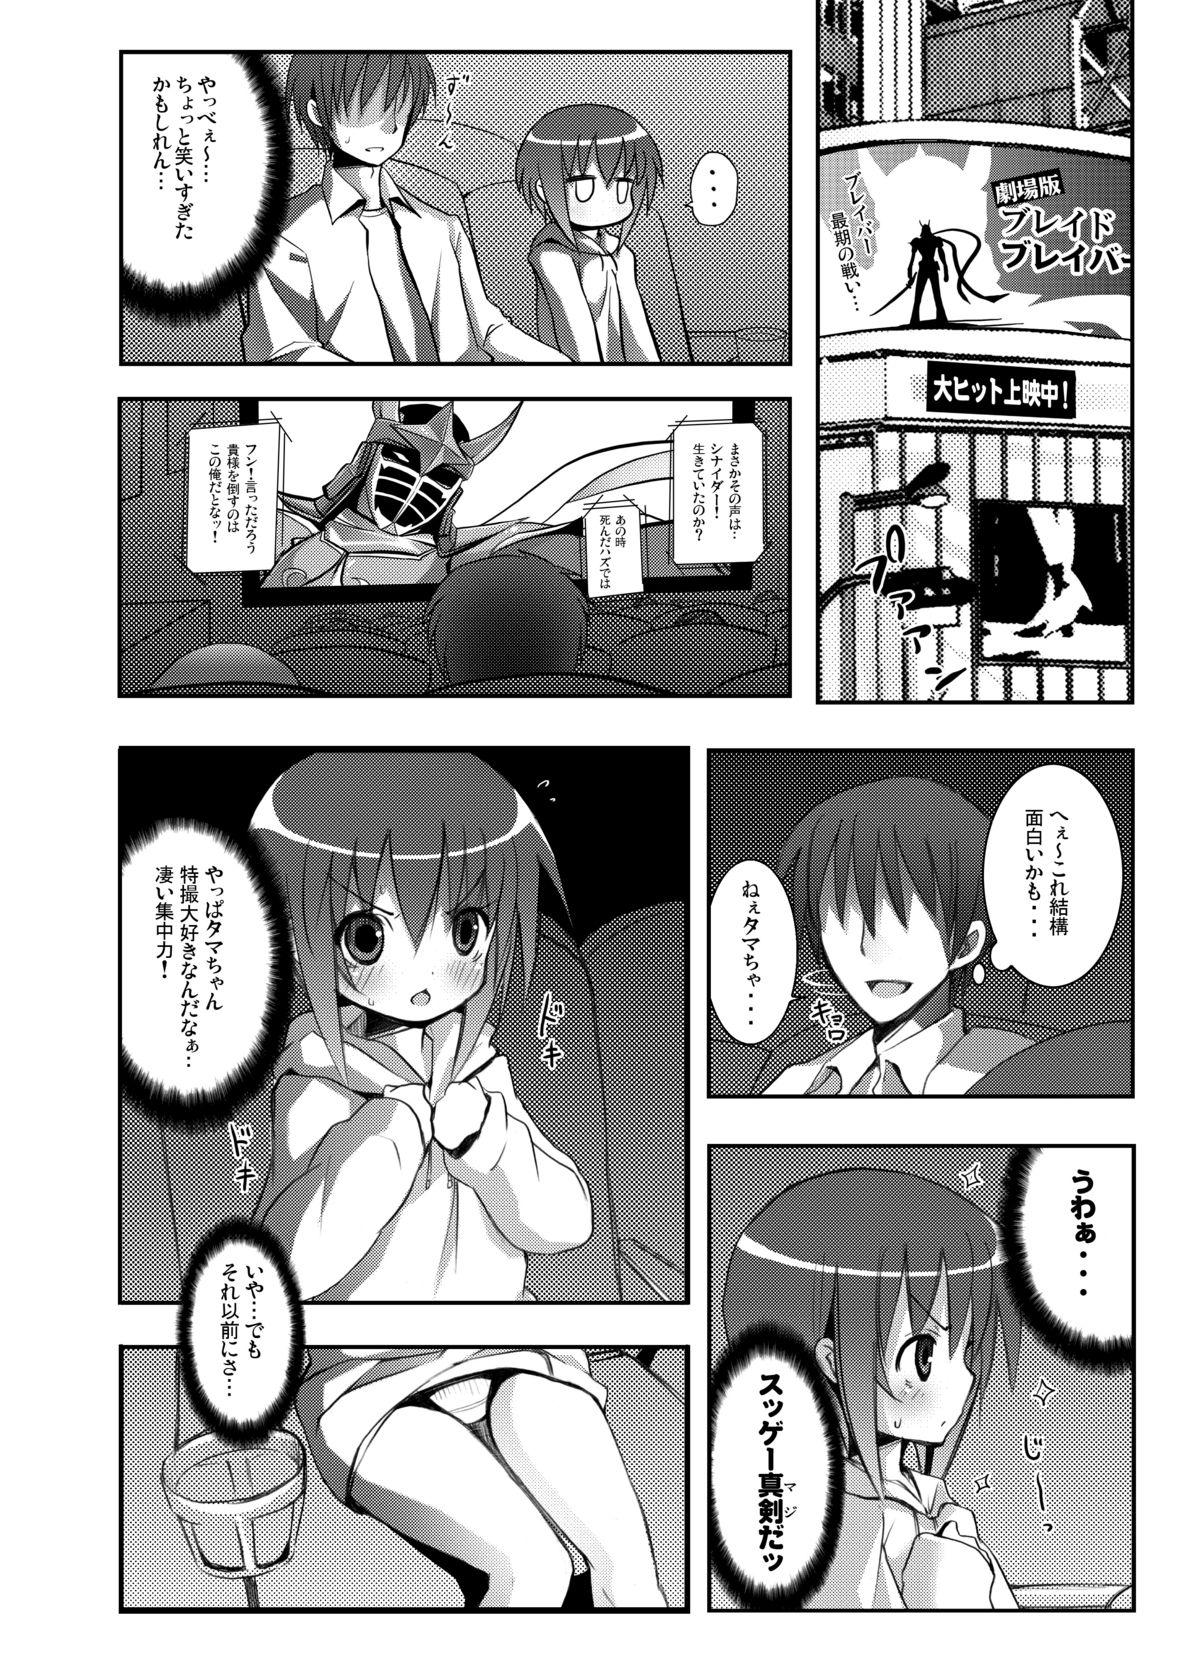 Denmark Tama-chan to Date. - Bamboo blade Spying - Page 7